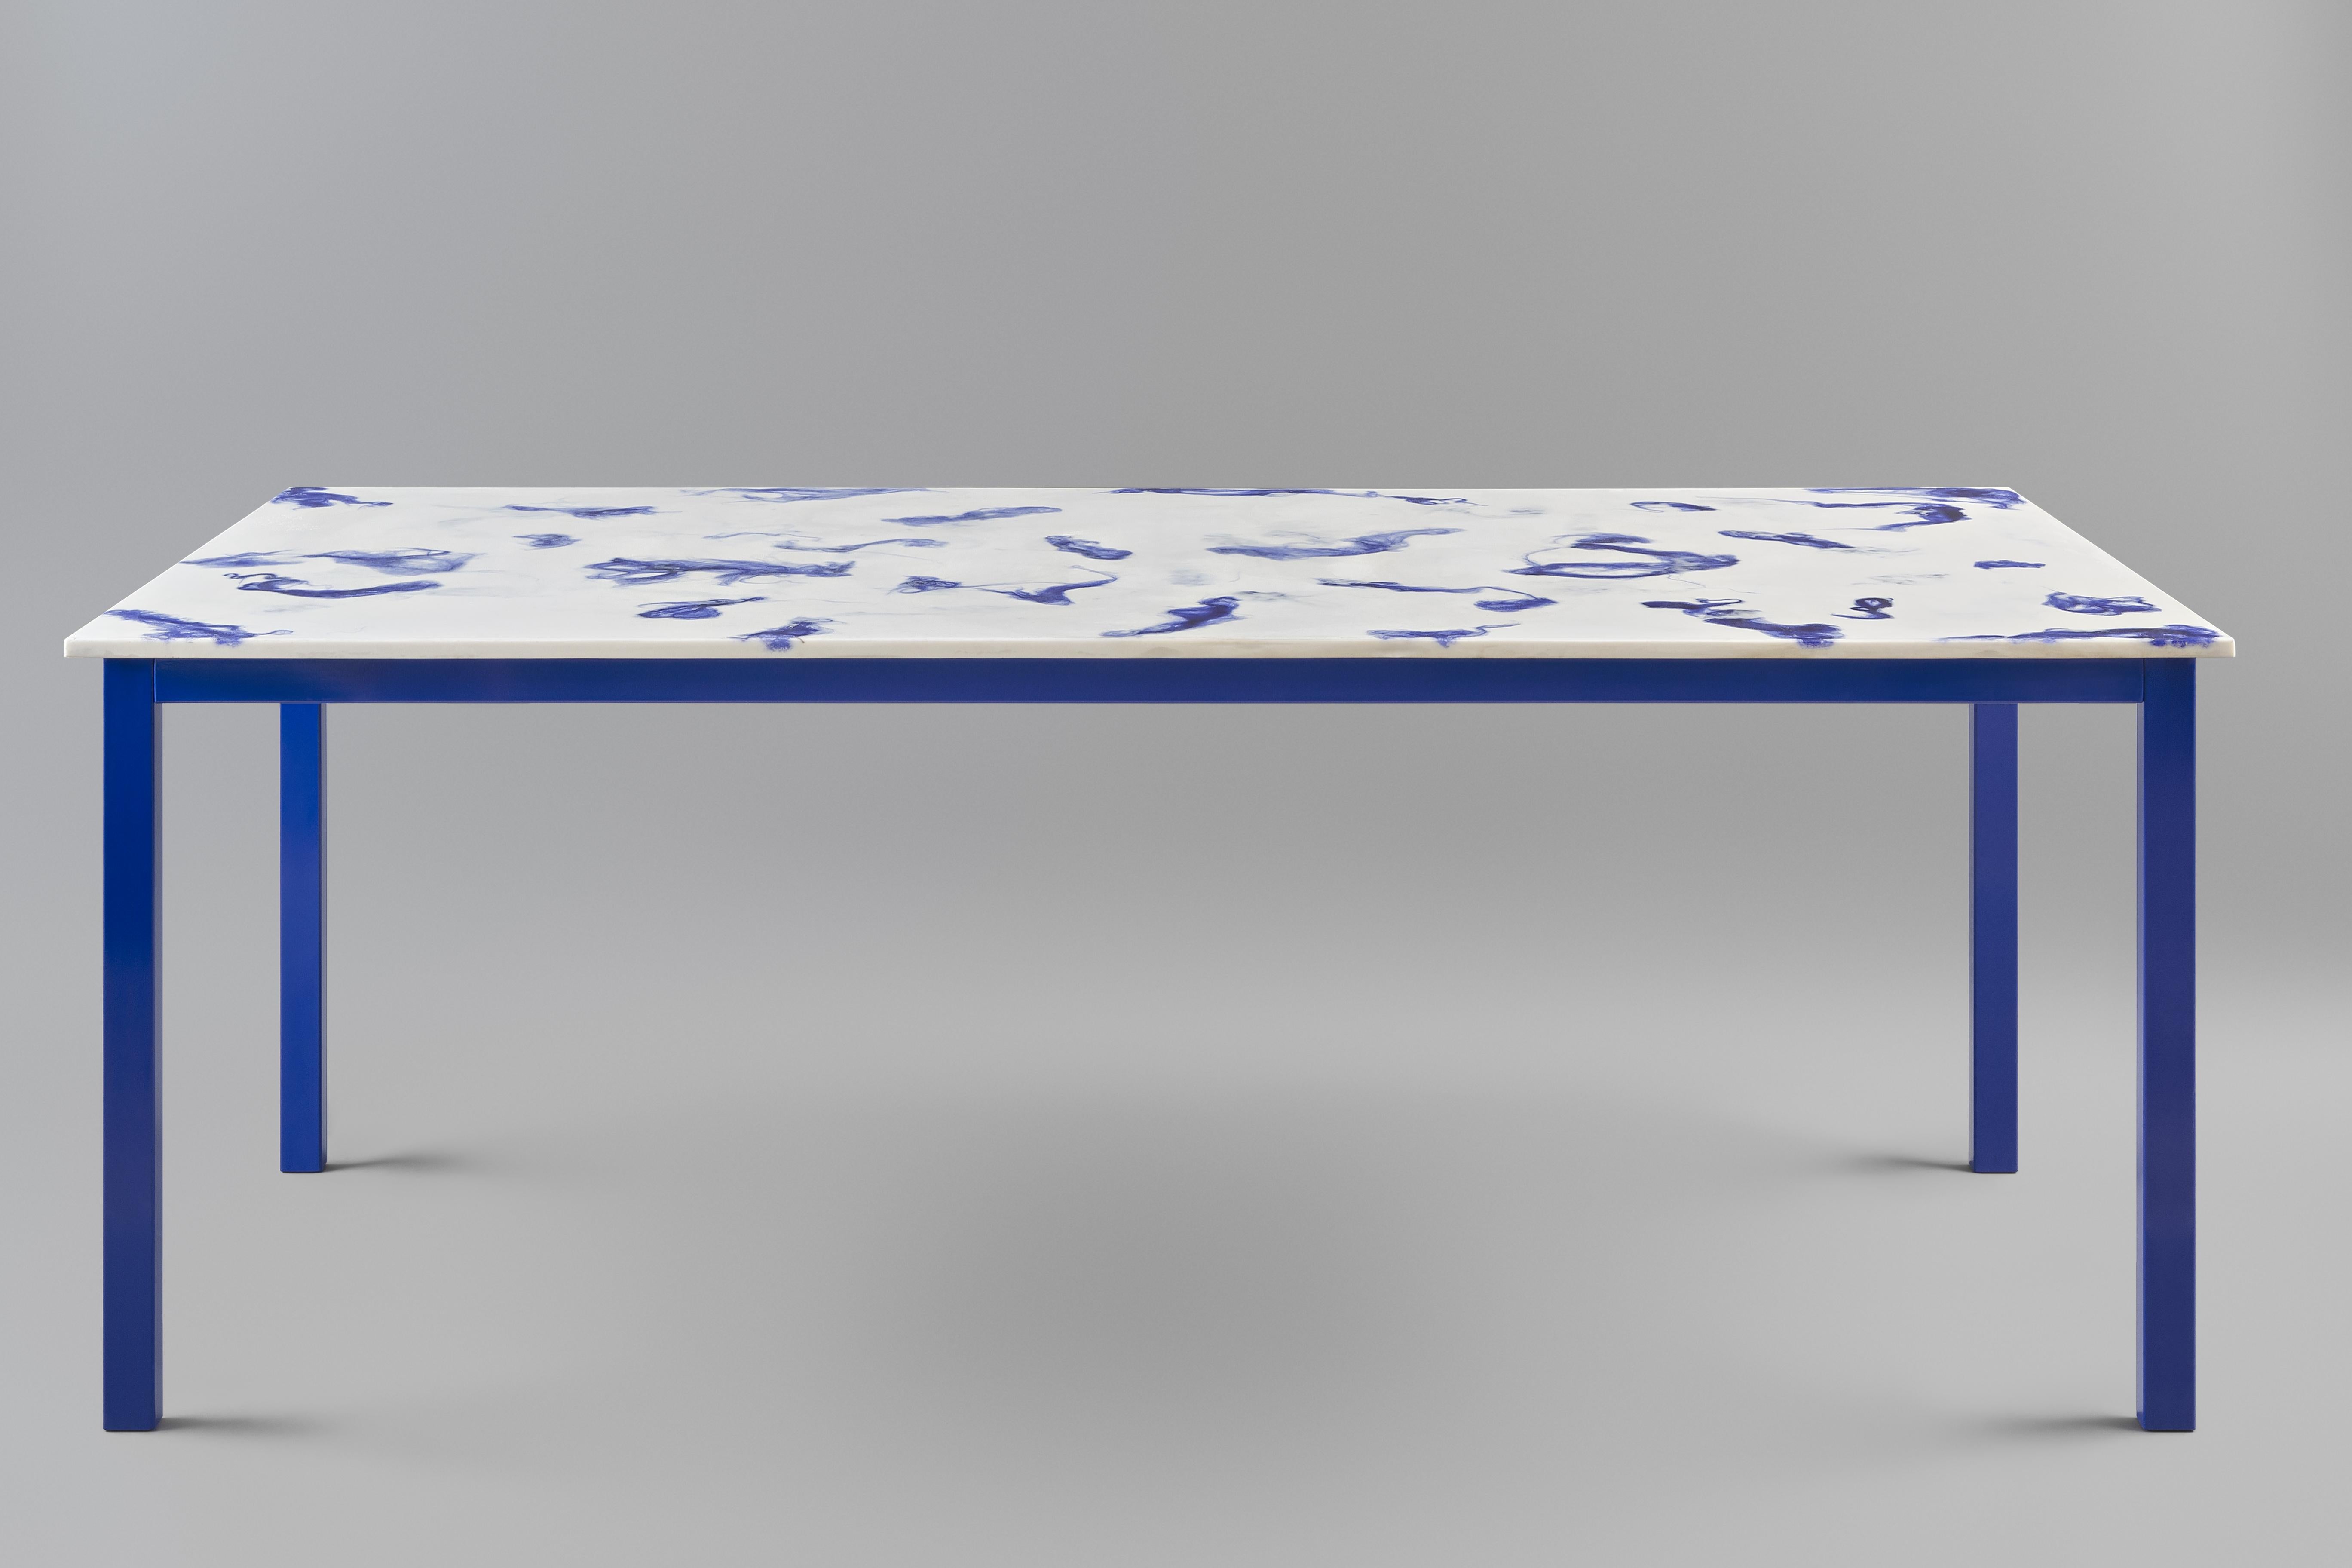 Fluent dining table.
The table top is made in Marwoolus material with blue wool fibers and white Carrara marble powder base.
The steel frame structure is blue powder coated.

Material info:
Marwoolus is a new material invented by Marco Guazzini